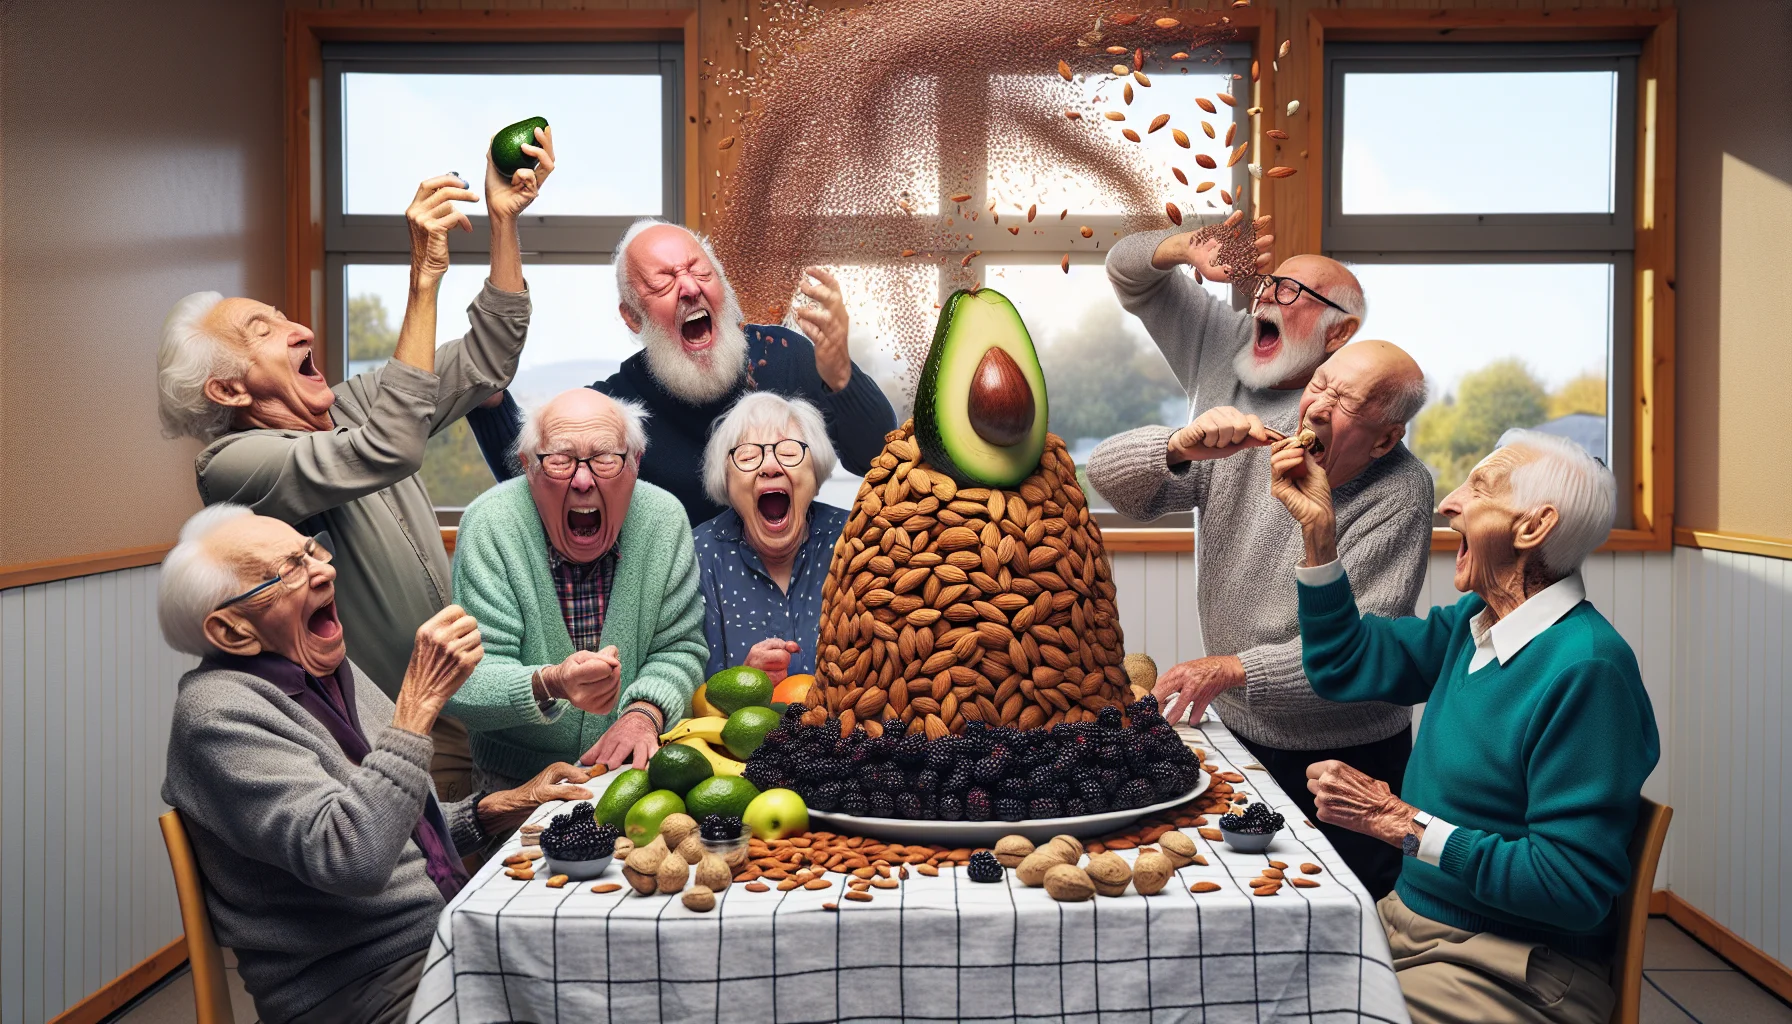 Generate a humorous and realistic image depicting a scene in a lively senior citizens community. Within this scene, a group of older individuals, of a variety of descents such as Caucasian, Hispanic, and Black, are enthusiastically participating in a 'Healthy Food Contest'. The table in front of them is piled high with foods known for being high in fiber and low in carbohydrates, like avocados, almonds, blackberries, and flax seeds. Illustrate surprising scenarios: one person putting an entire avocado to their mouth, another shaking flax seeds in the air like confetti, while a third uses almonds like maracas. Ensure that the emphasis is on fun, camaraderie, and the pursuit of health.